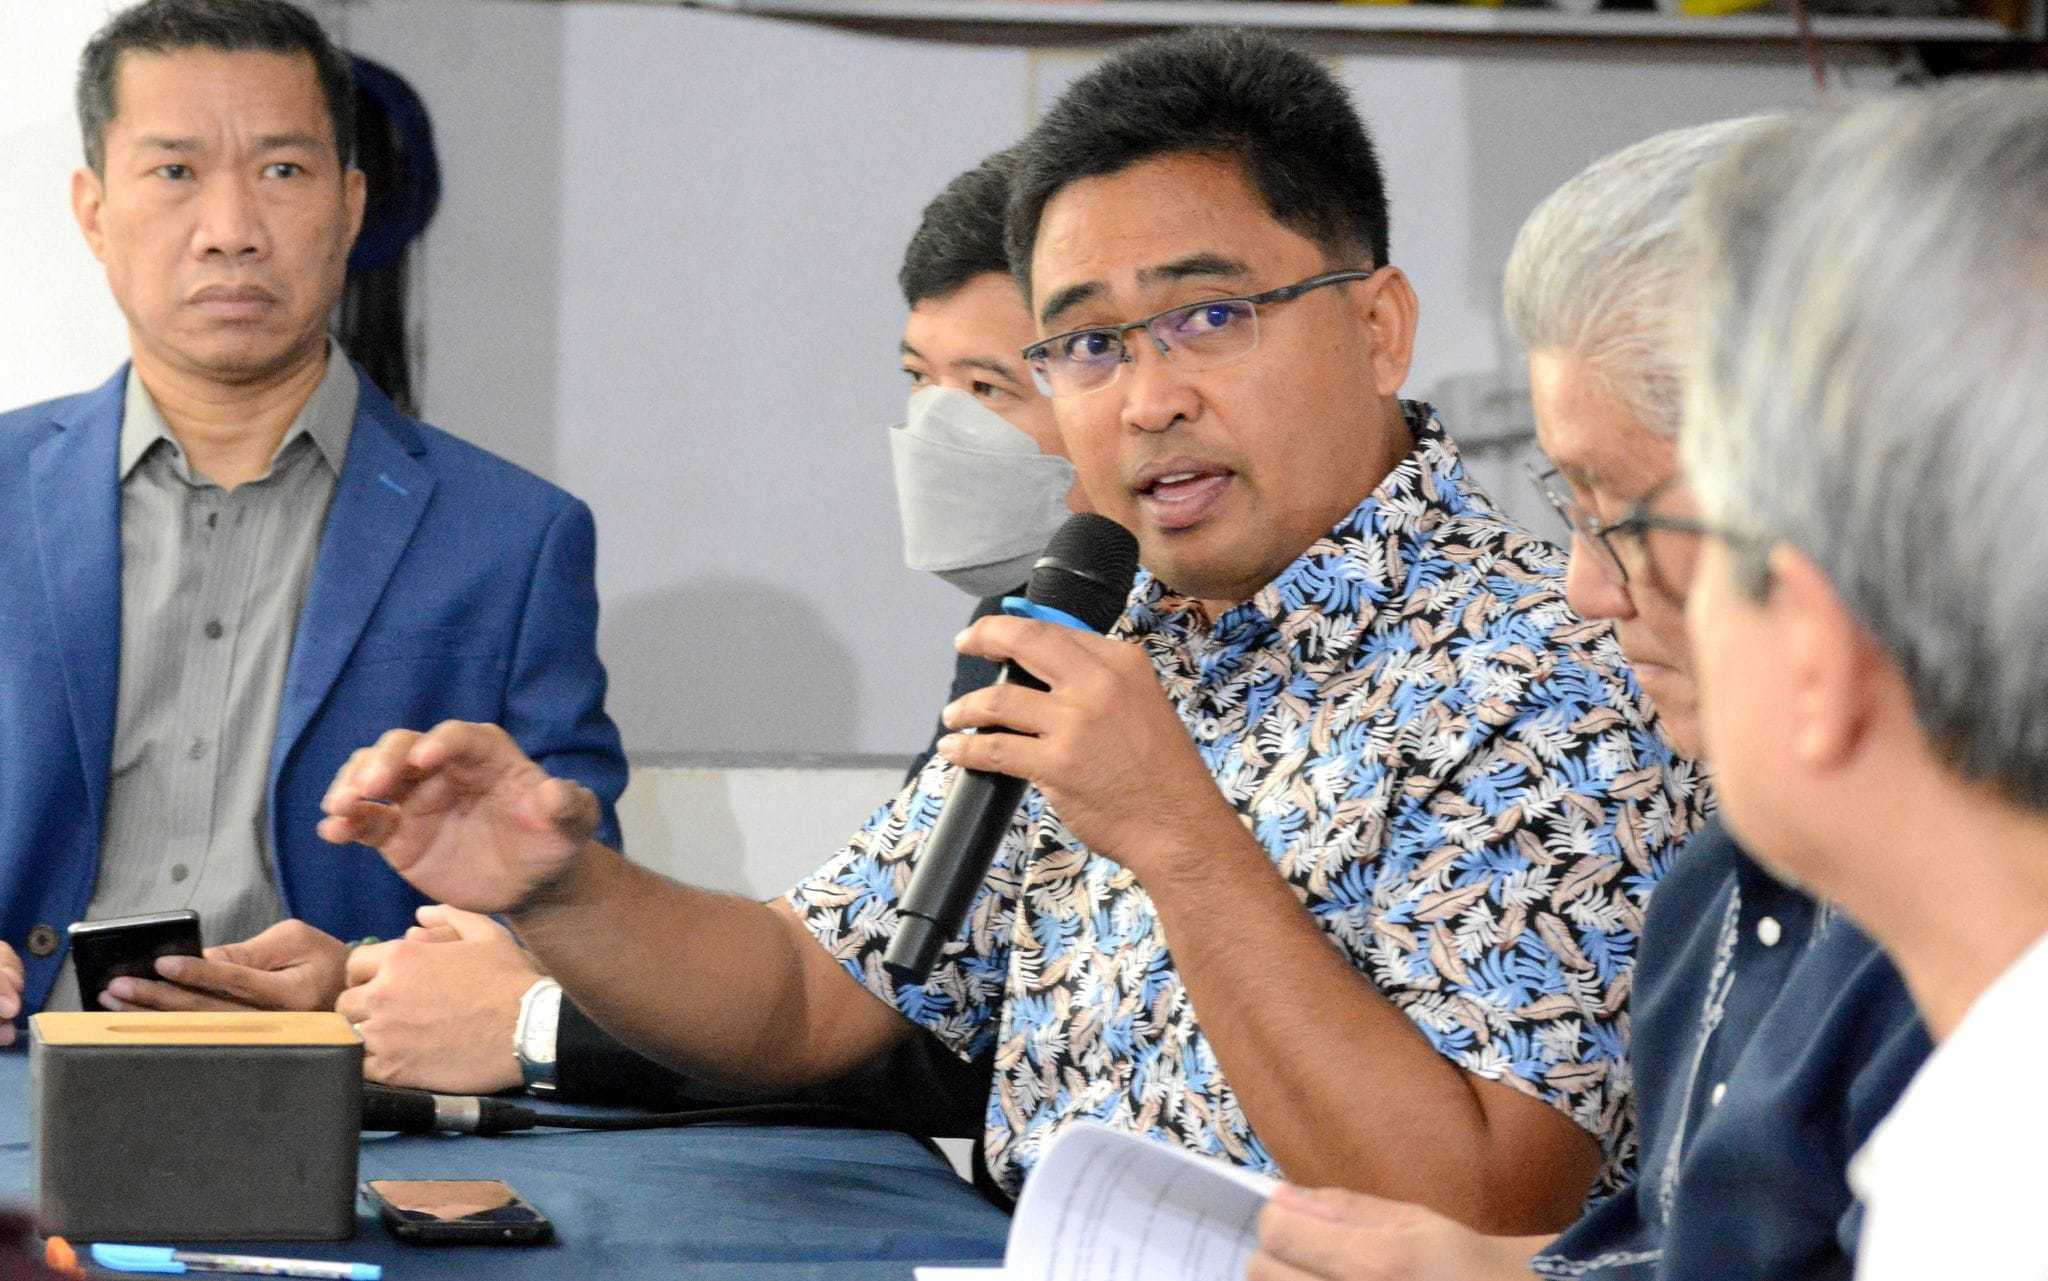 Invest in technology to reduce future environmental disasters like the Mindoro oil spill - Environmental expert